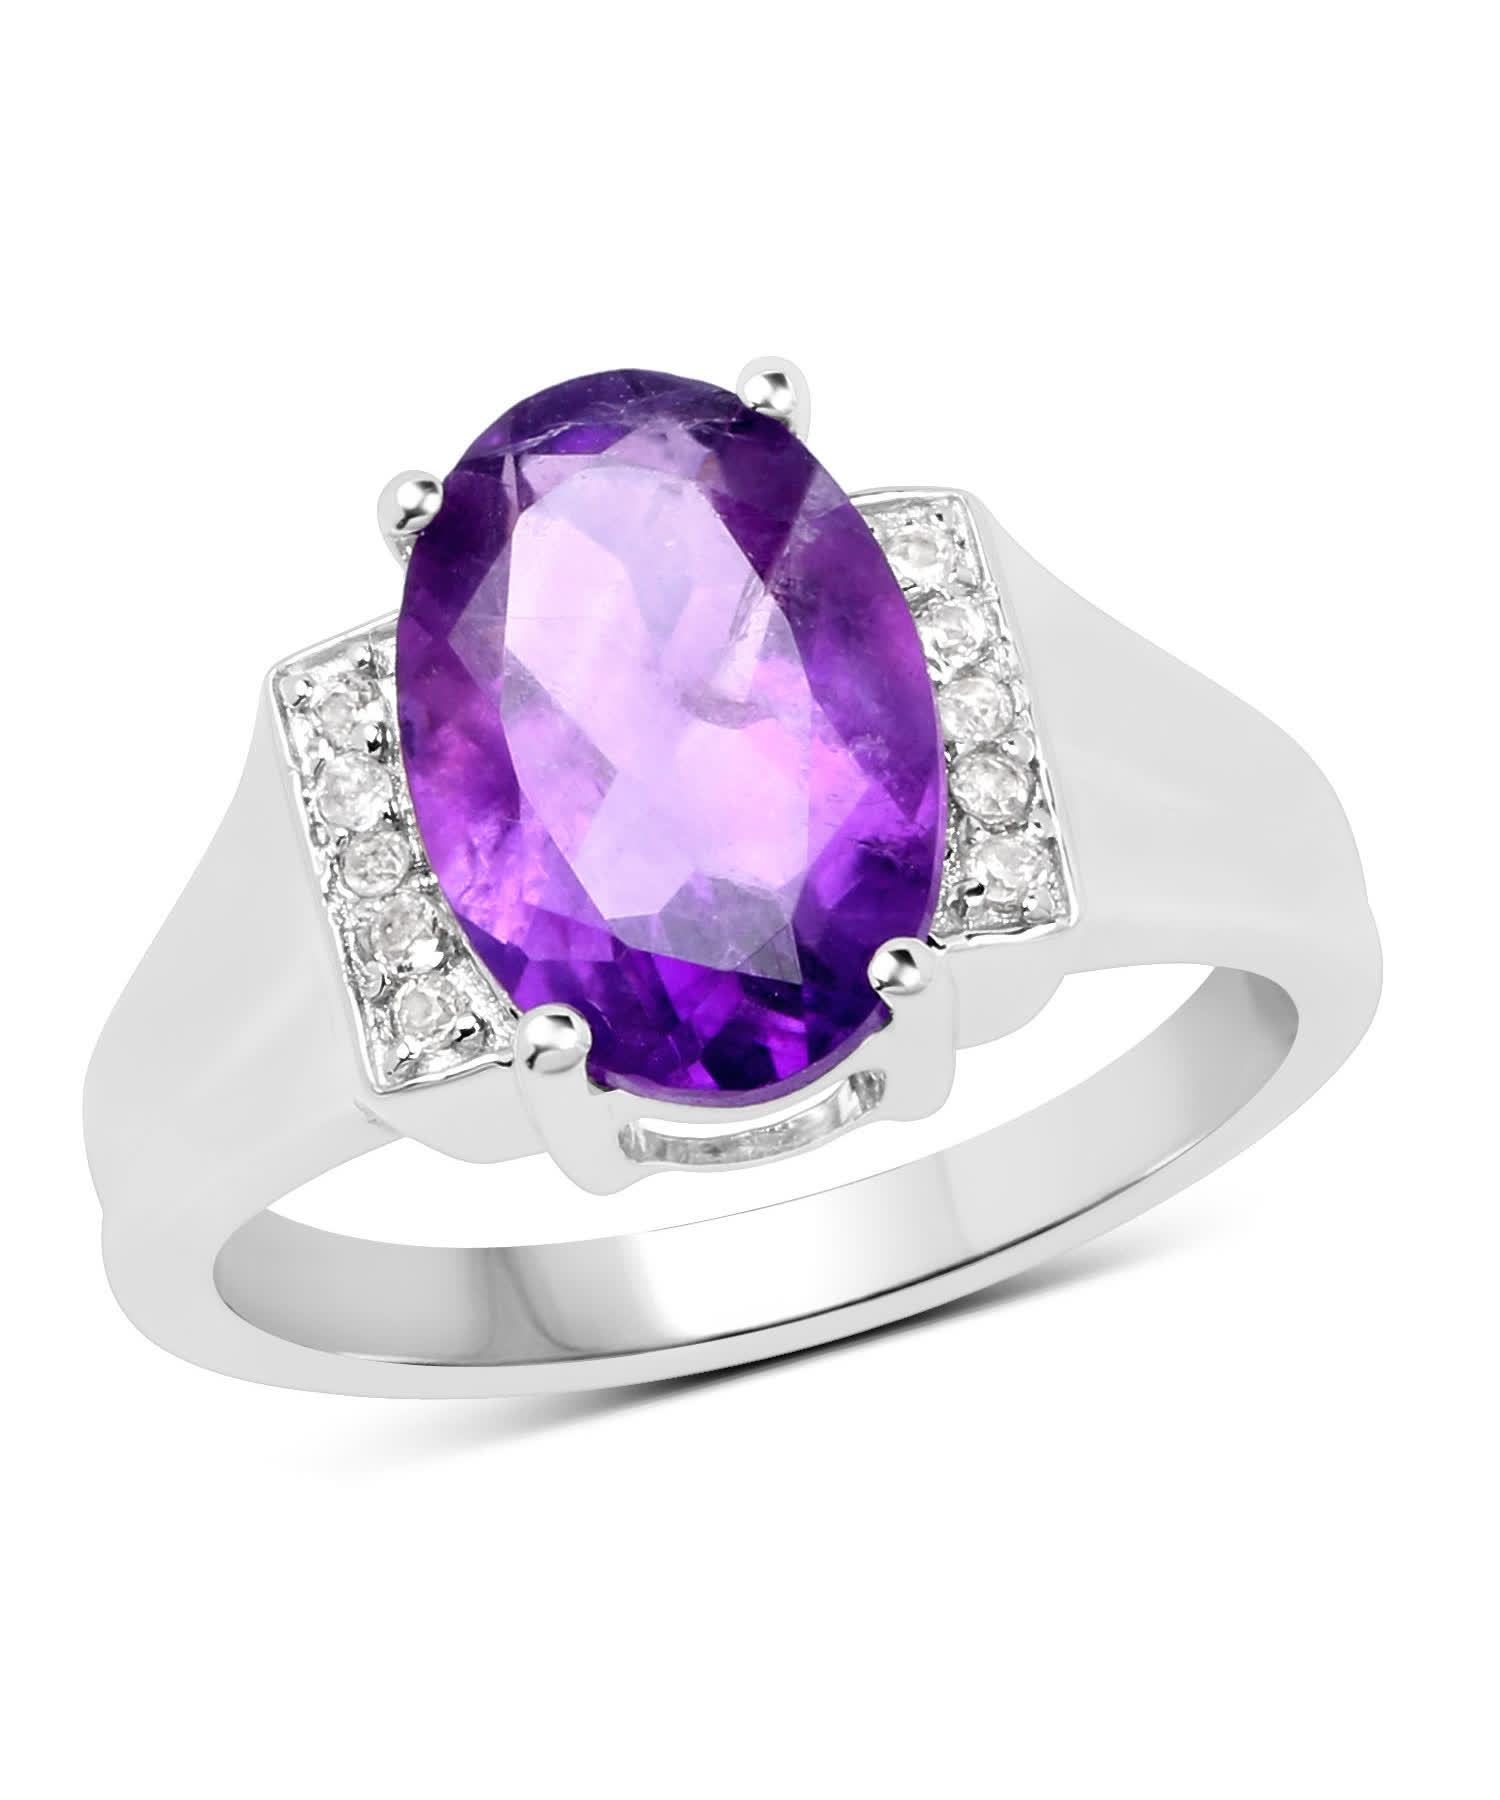 3.12ctw Natural Amethyst and Topaz Rhodium Plated 925 Sterling Silver Ring View 1